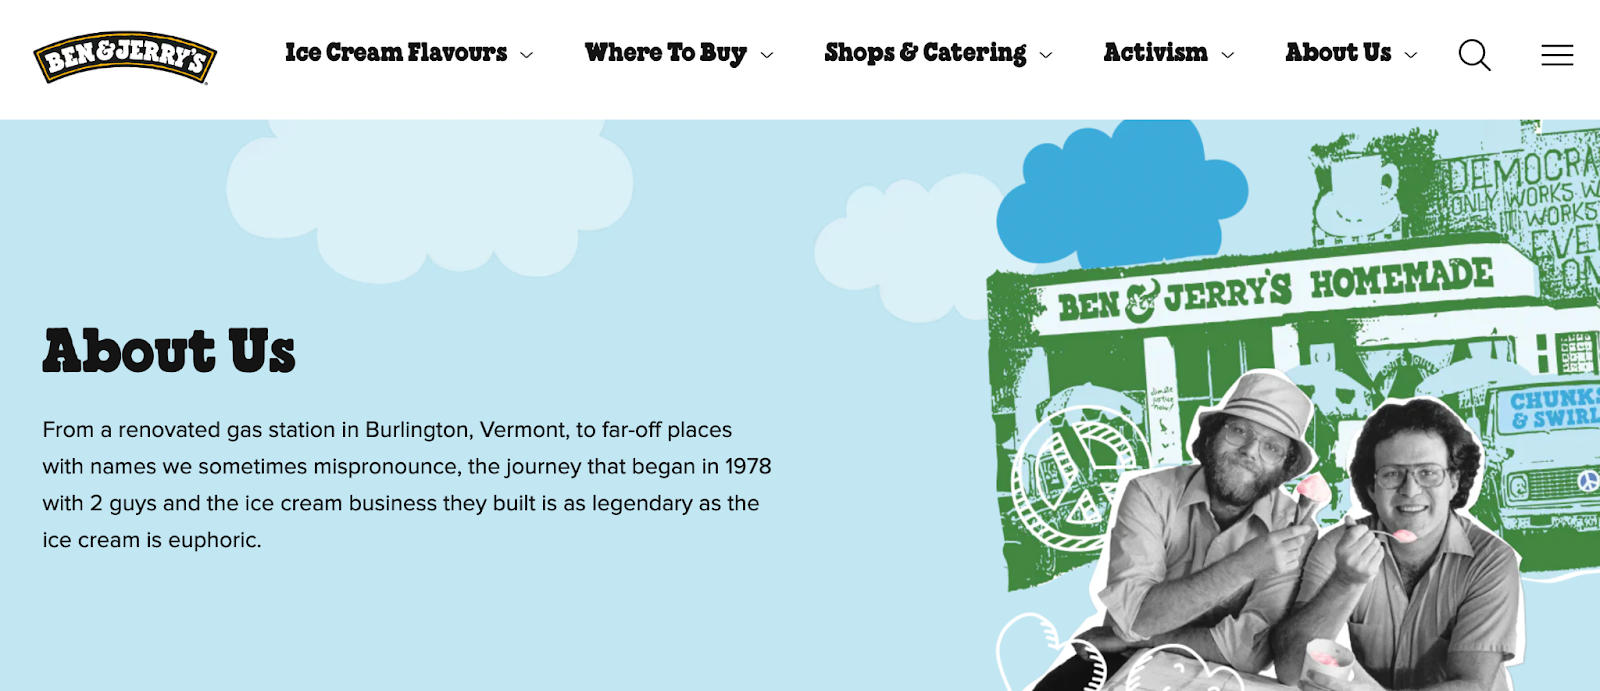 screenshot of Ben & Jerry’s brand story about us section